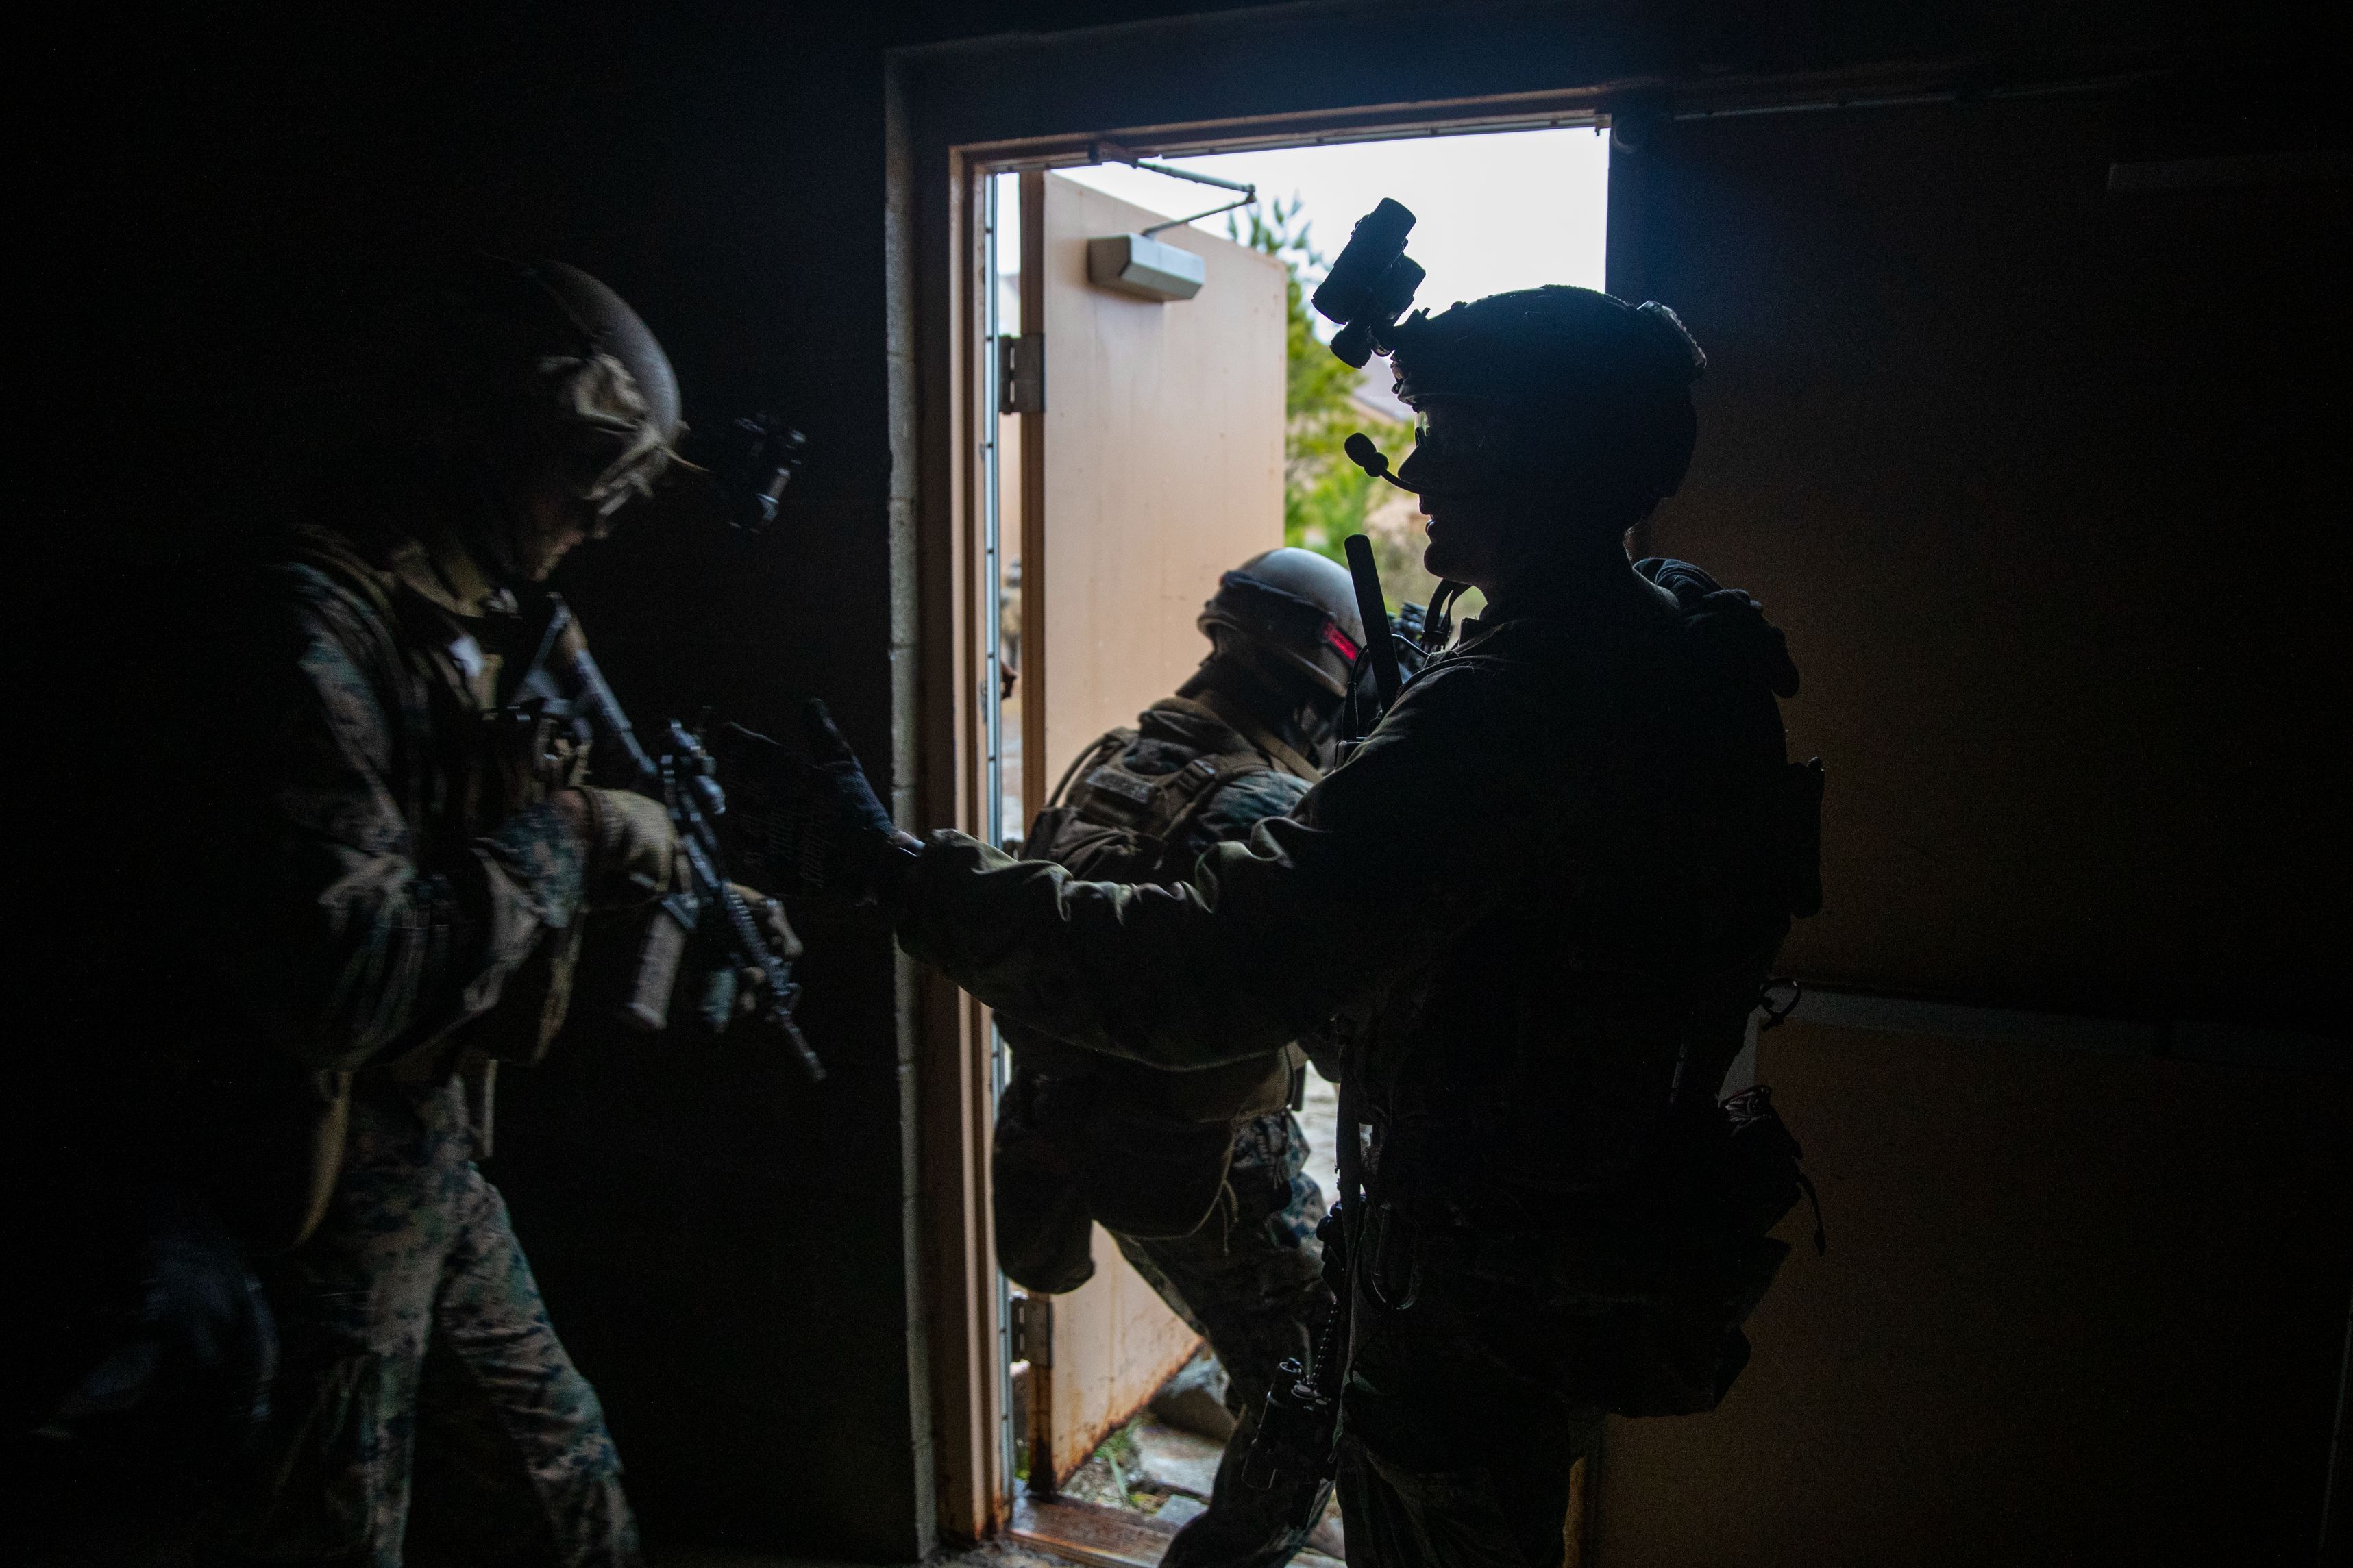 U.S. Marines with 2d Battalion, 6th Marine Regiment, 2d Marine Division exit a building during a Military Operations in Urban Terrain (MOUT) assault raid on Camp Lejeune, N.C., Jan. 12, 2021.